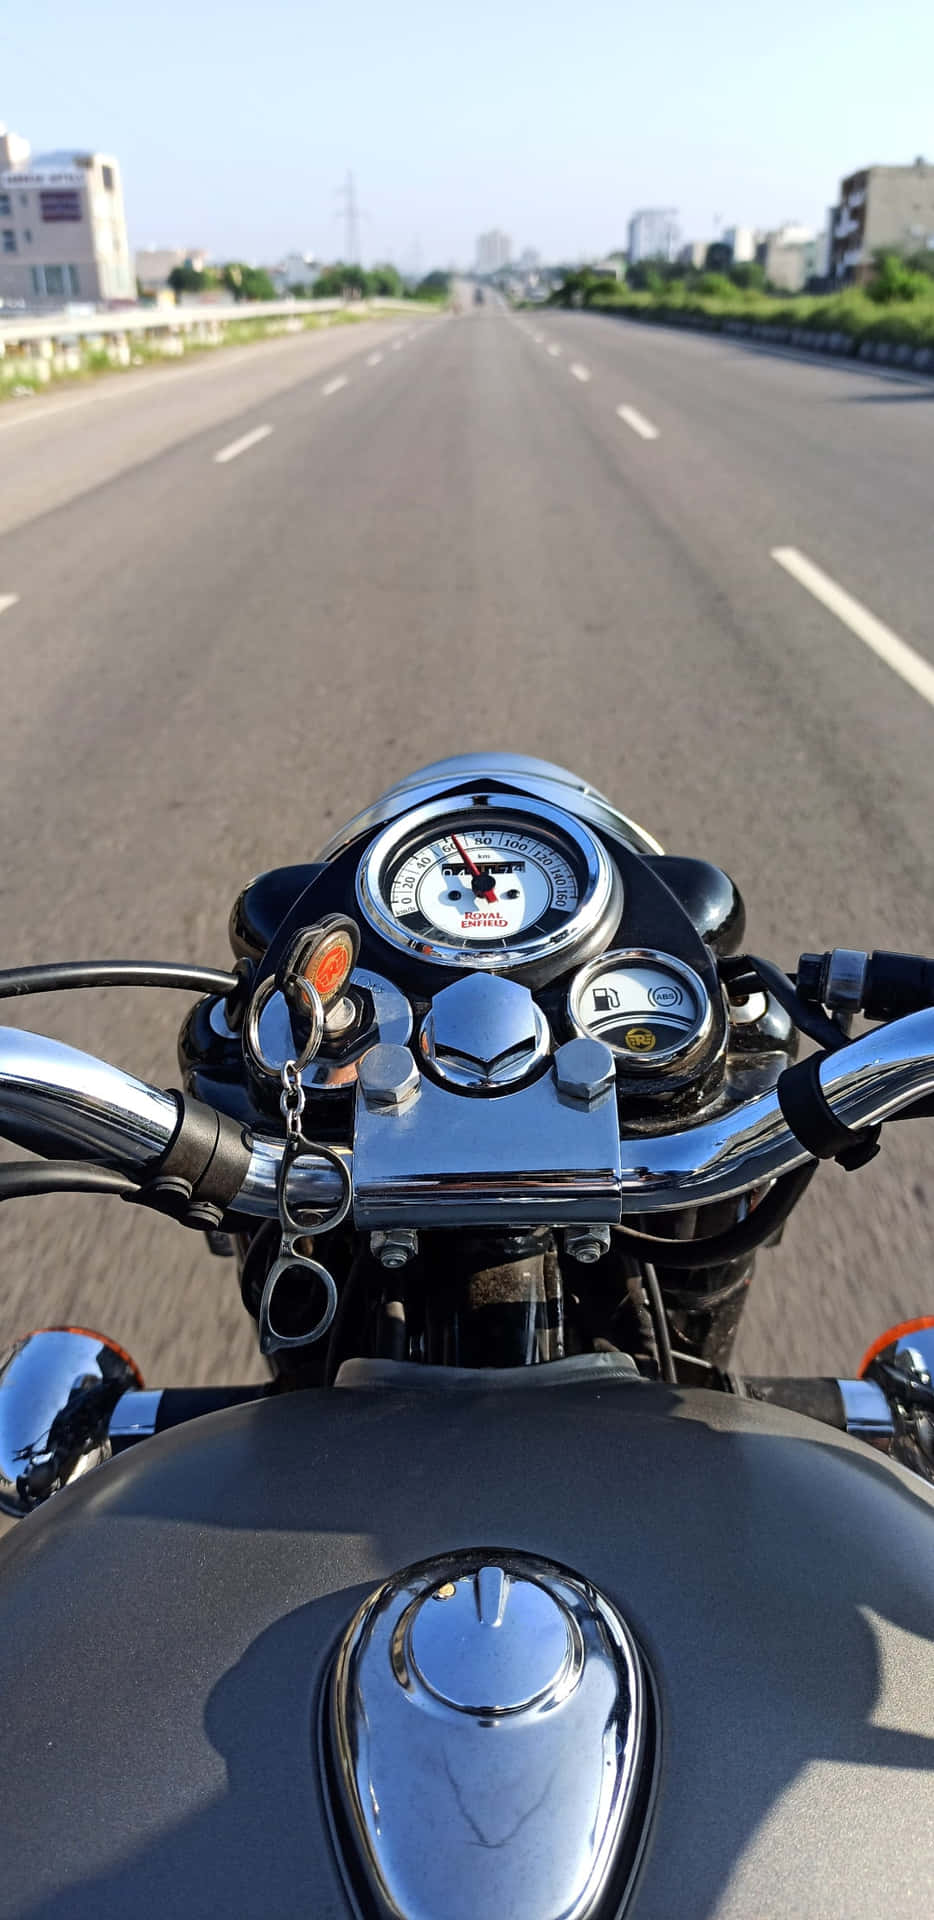 Experience Freedom on the Roads With the Royal Enfield Bullet